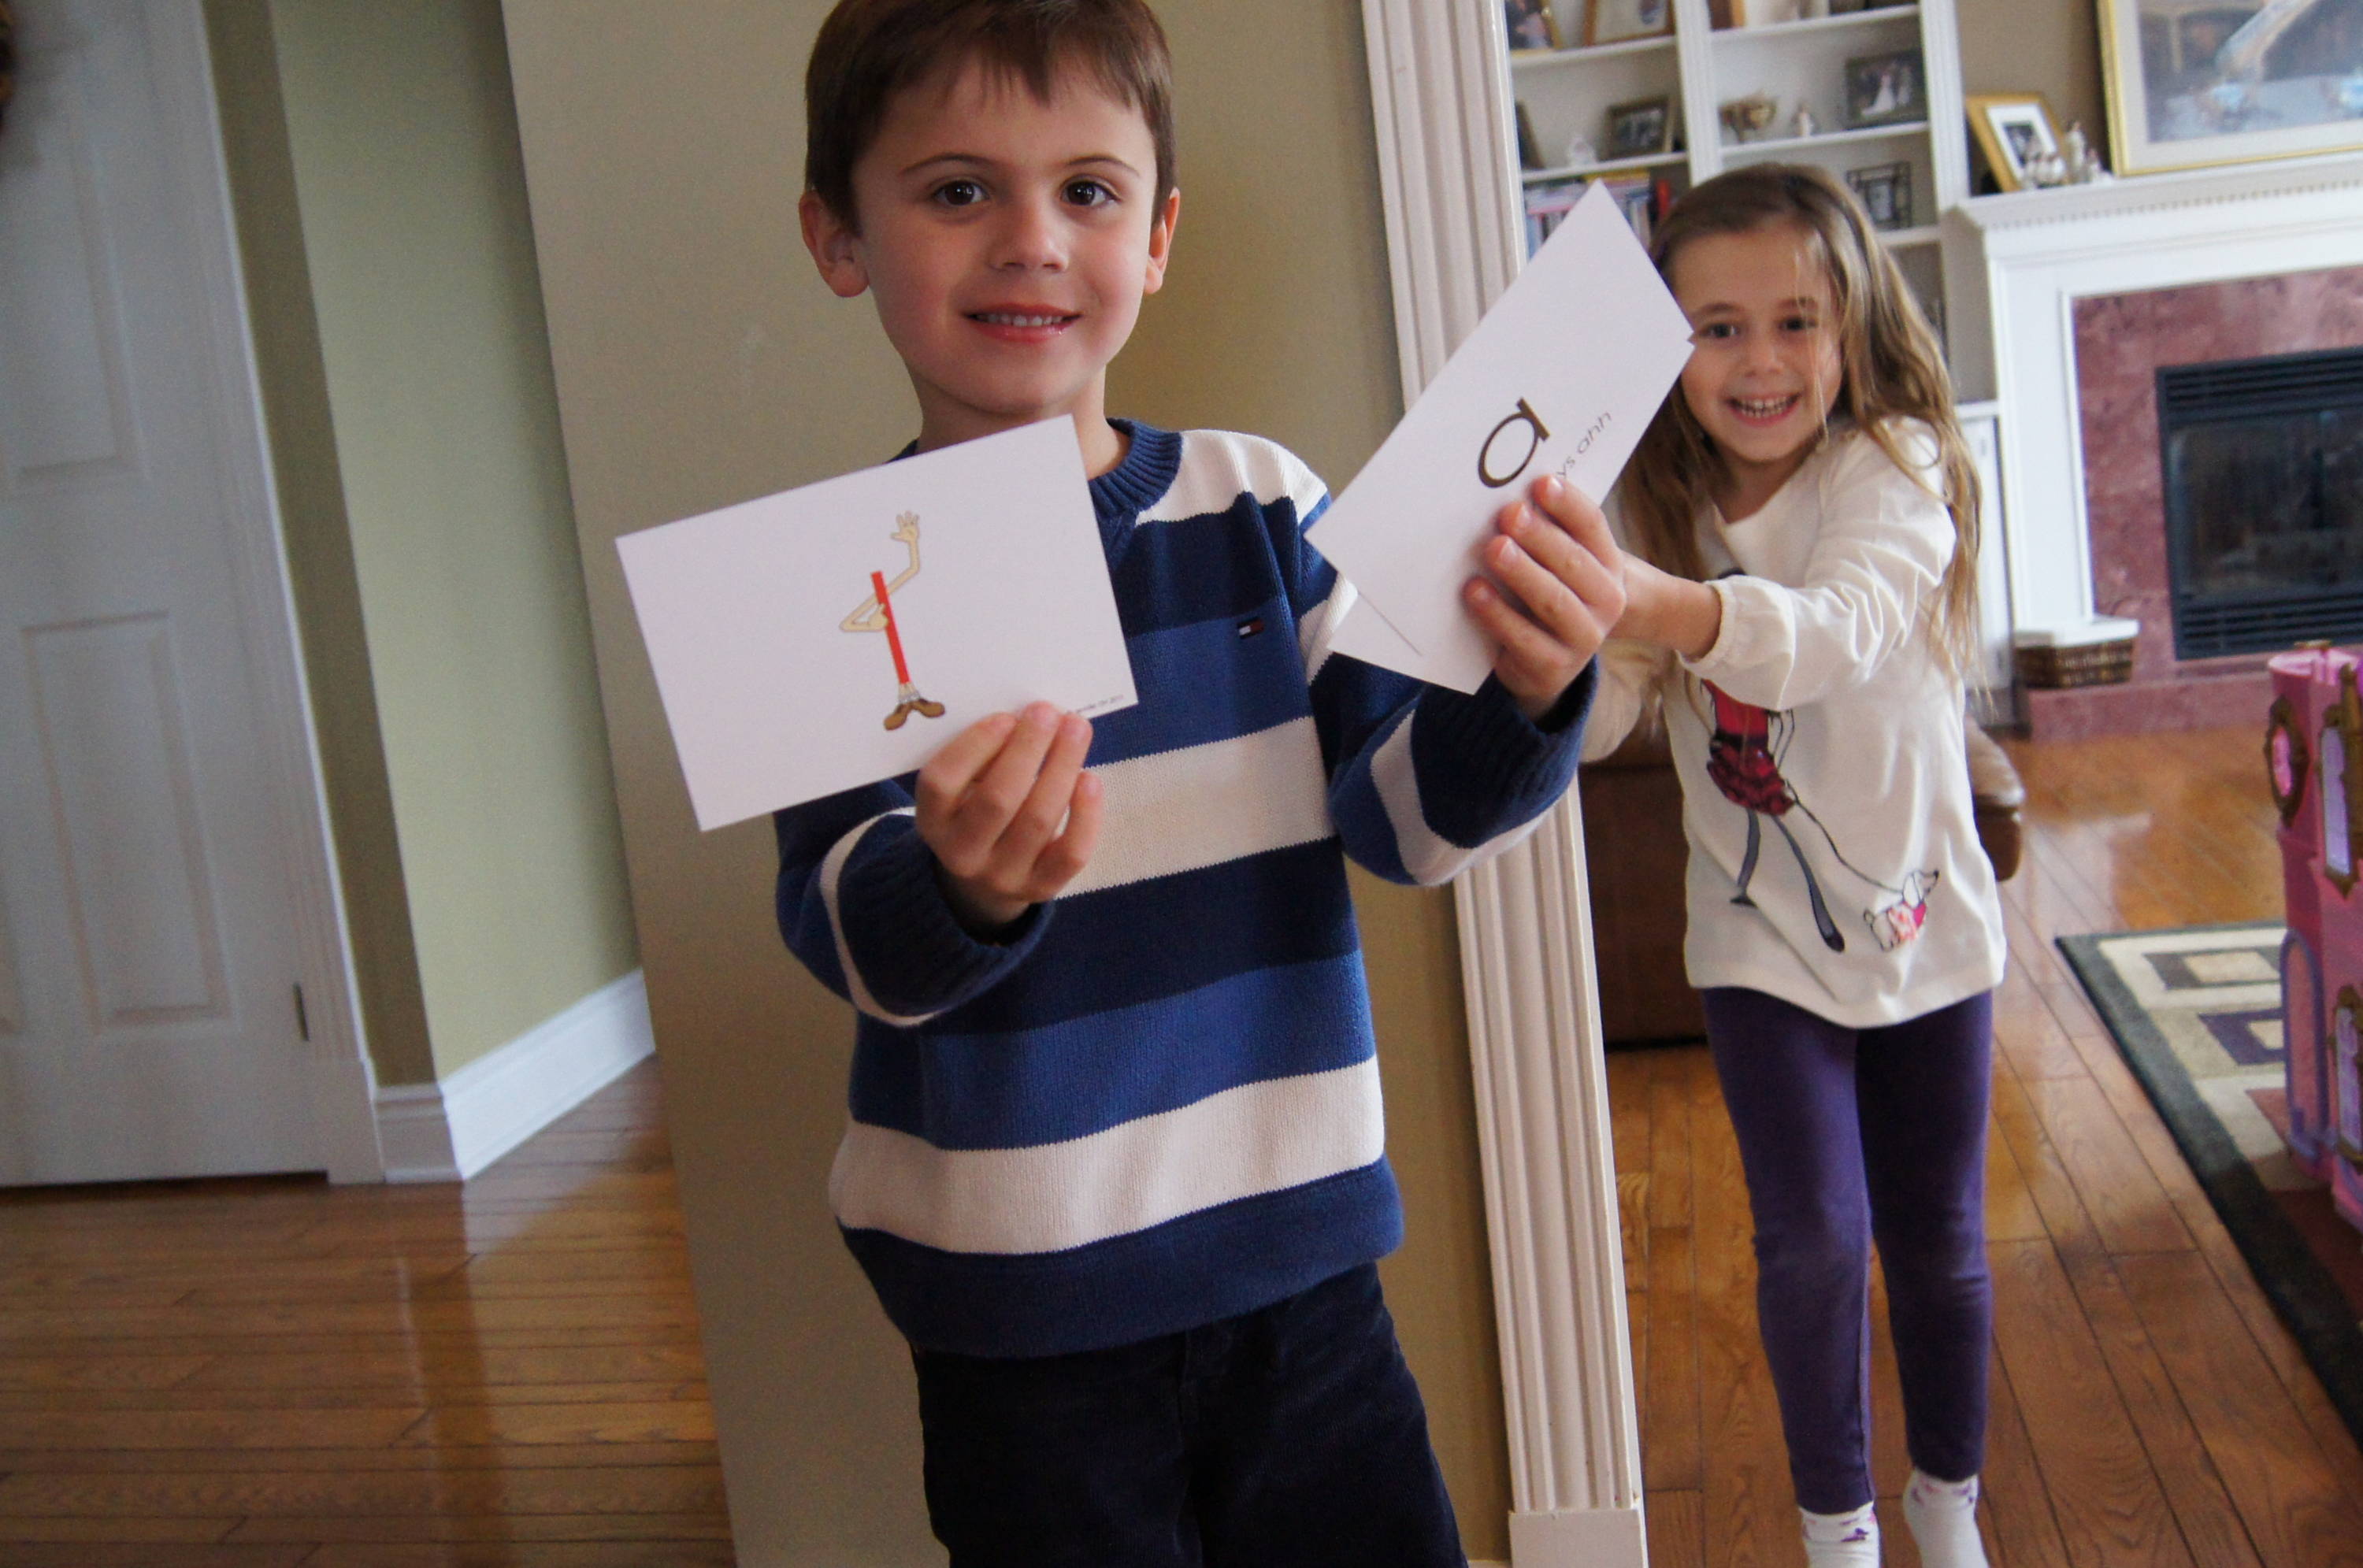 Photo of children with Eyeword cards